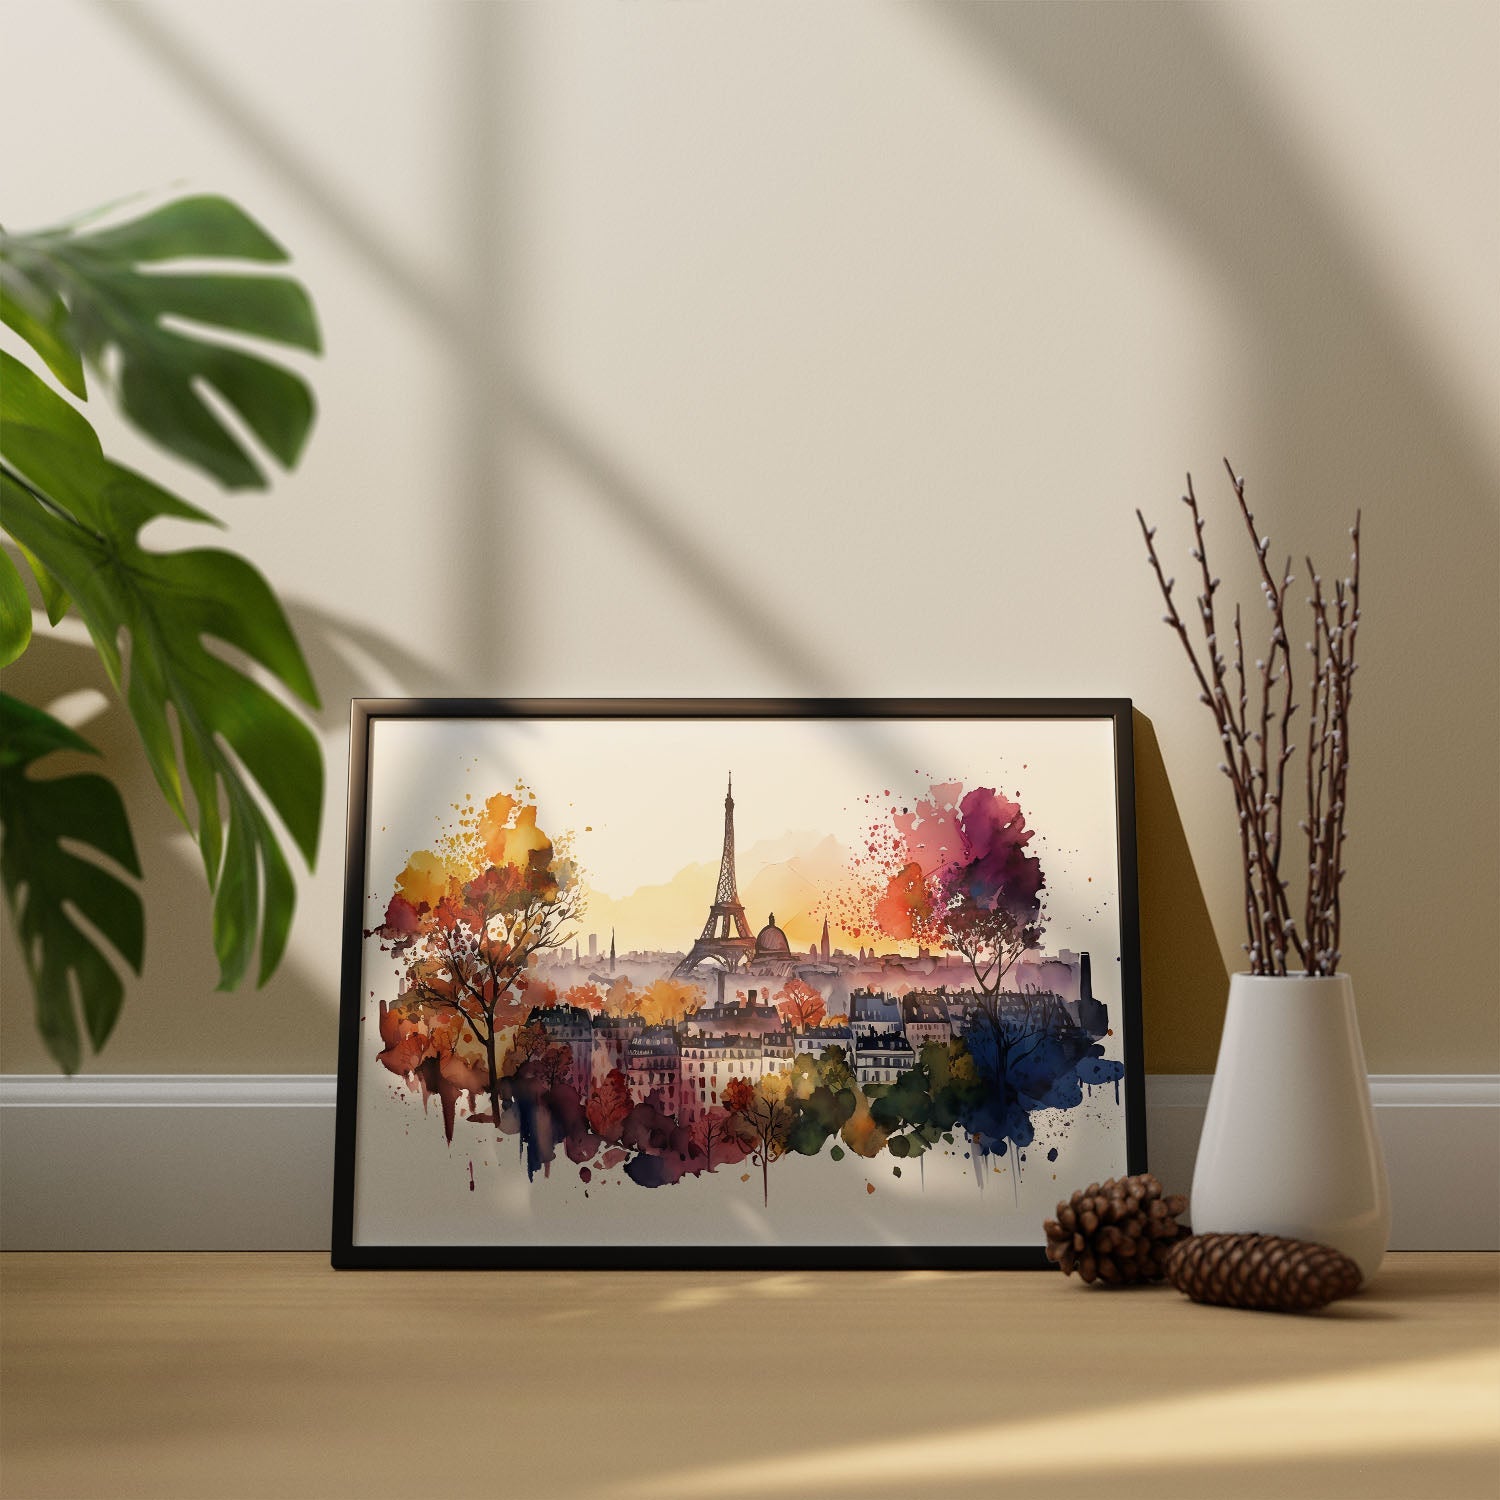 Nacnic watercolor of a skyline of the city of paris. Aesthetic Wall Art Prints for Bedroom or Living Room Design.-Artwork-Nacnic-A4-Sin Marco-Nacnic Estudio SL